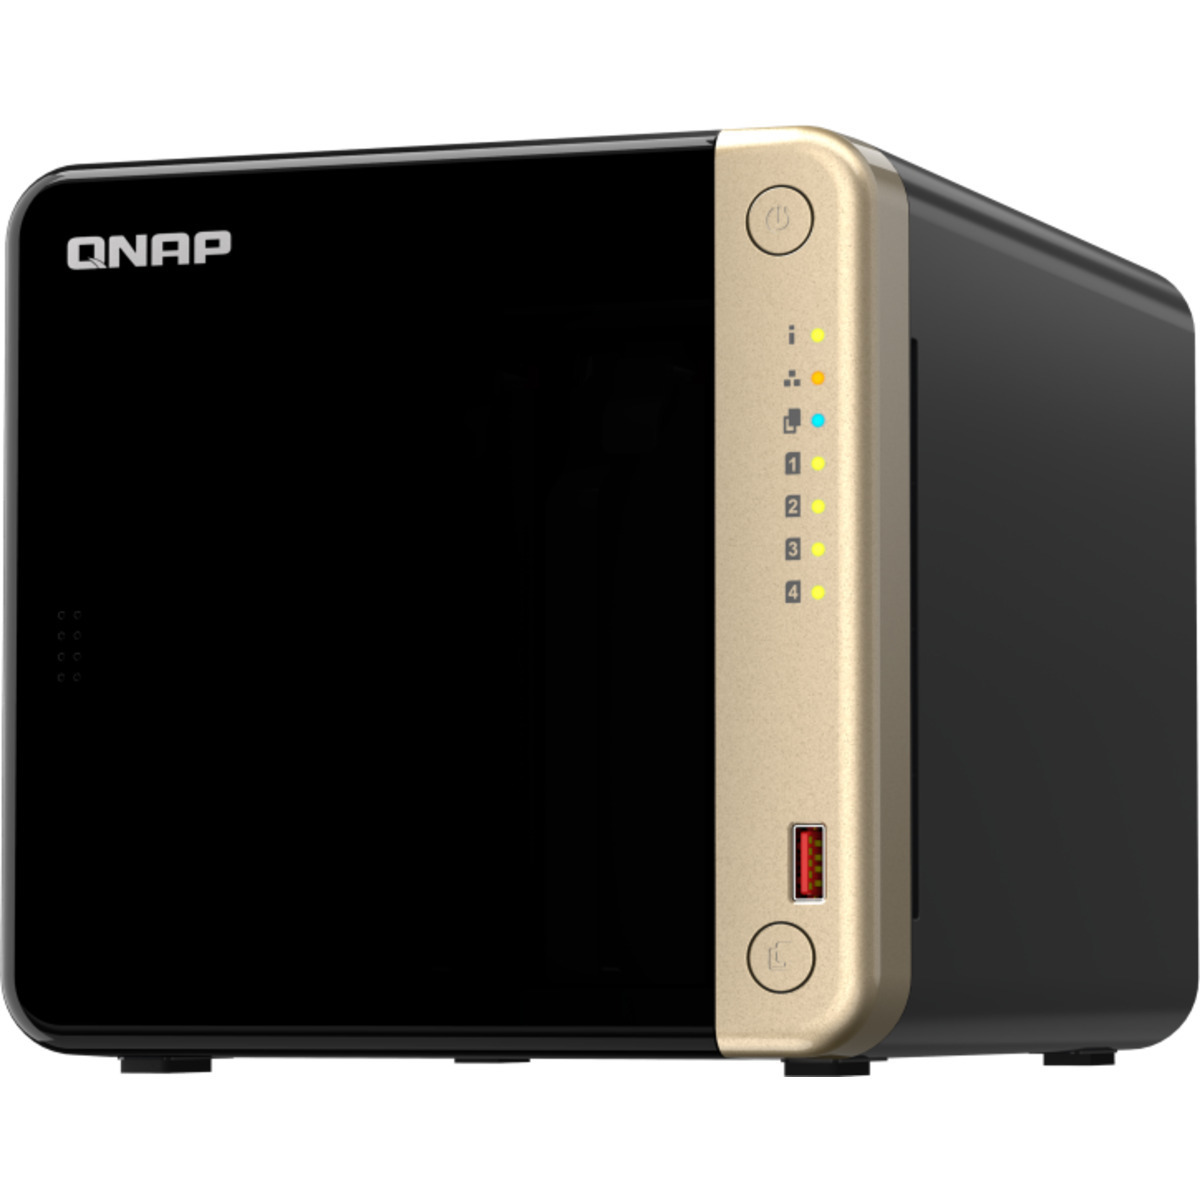 QNAP TS-464 96tb 4-Bay Desktop Multimedia / Power User / Business NAS - Network Attached Storage Device 4x24tb Seagate IronWolf Pro ST24000NT002 3.5 7200rpm SATA 6Gb/s HDD NAS Class Drives Installed - Burn-In Tested TS-464